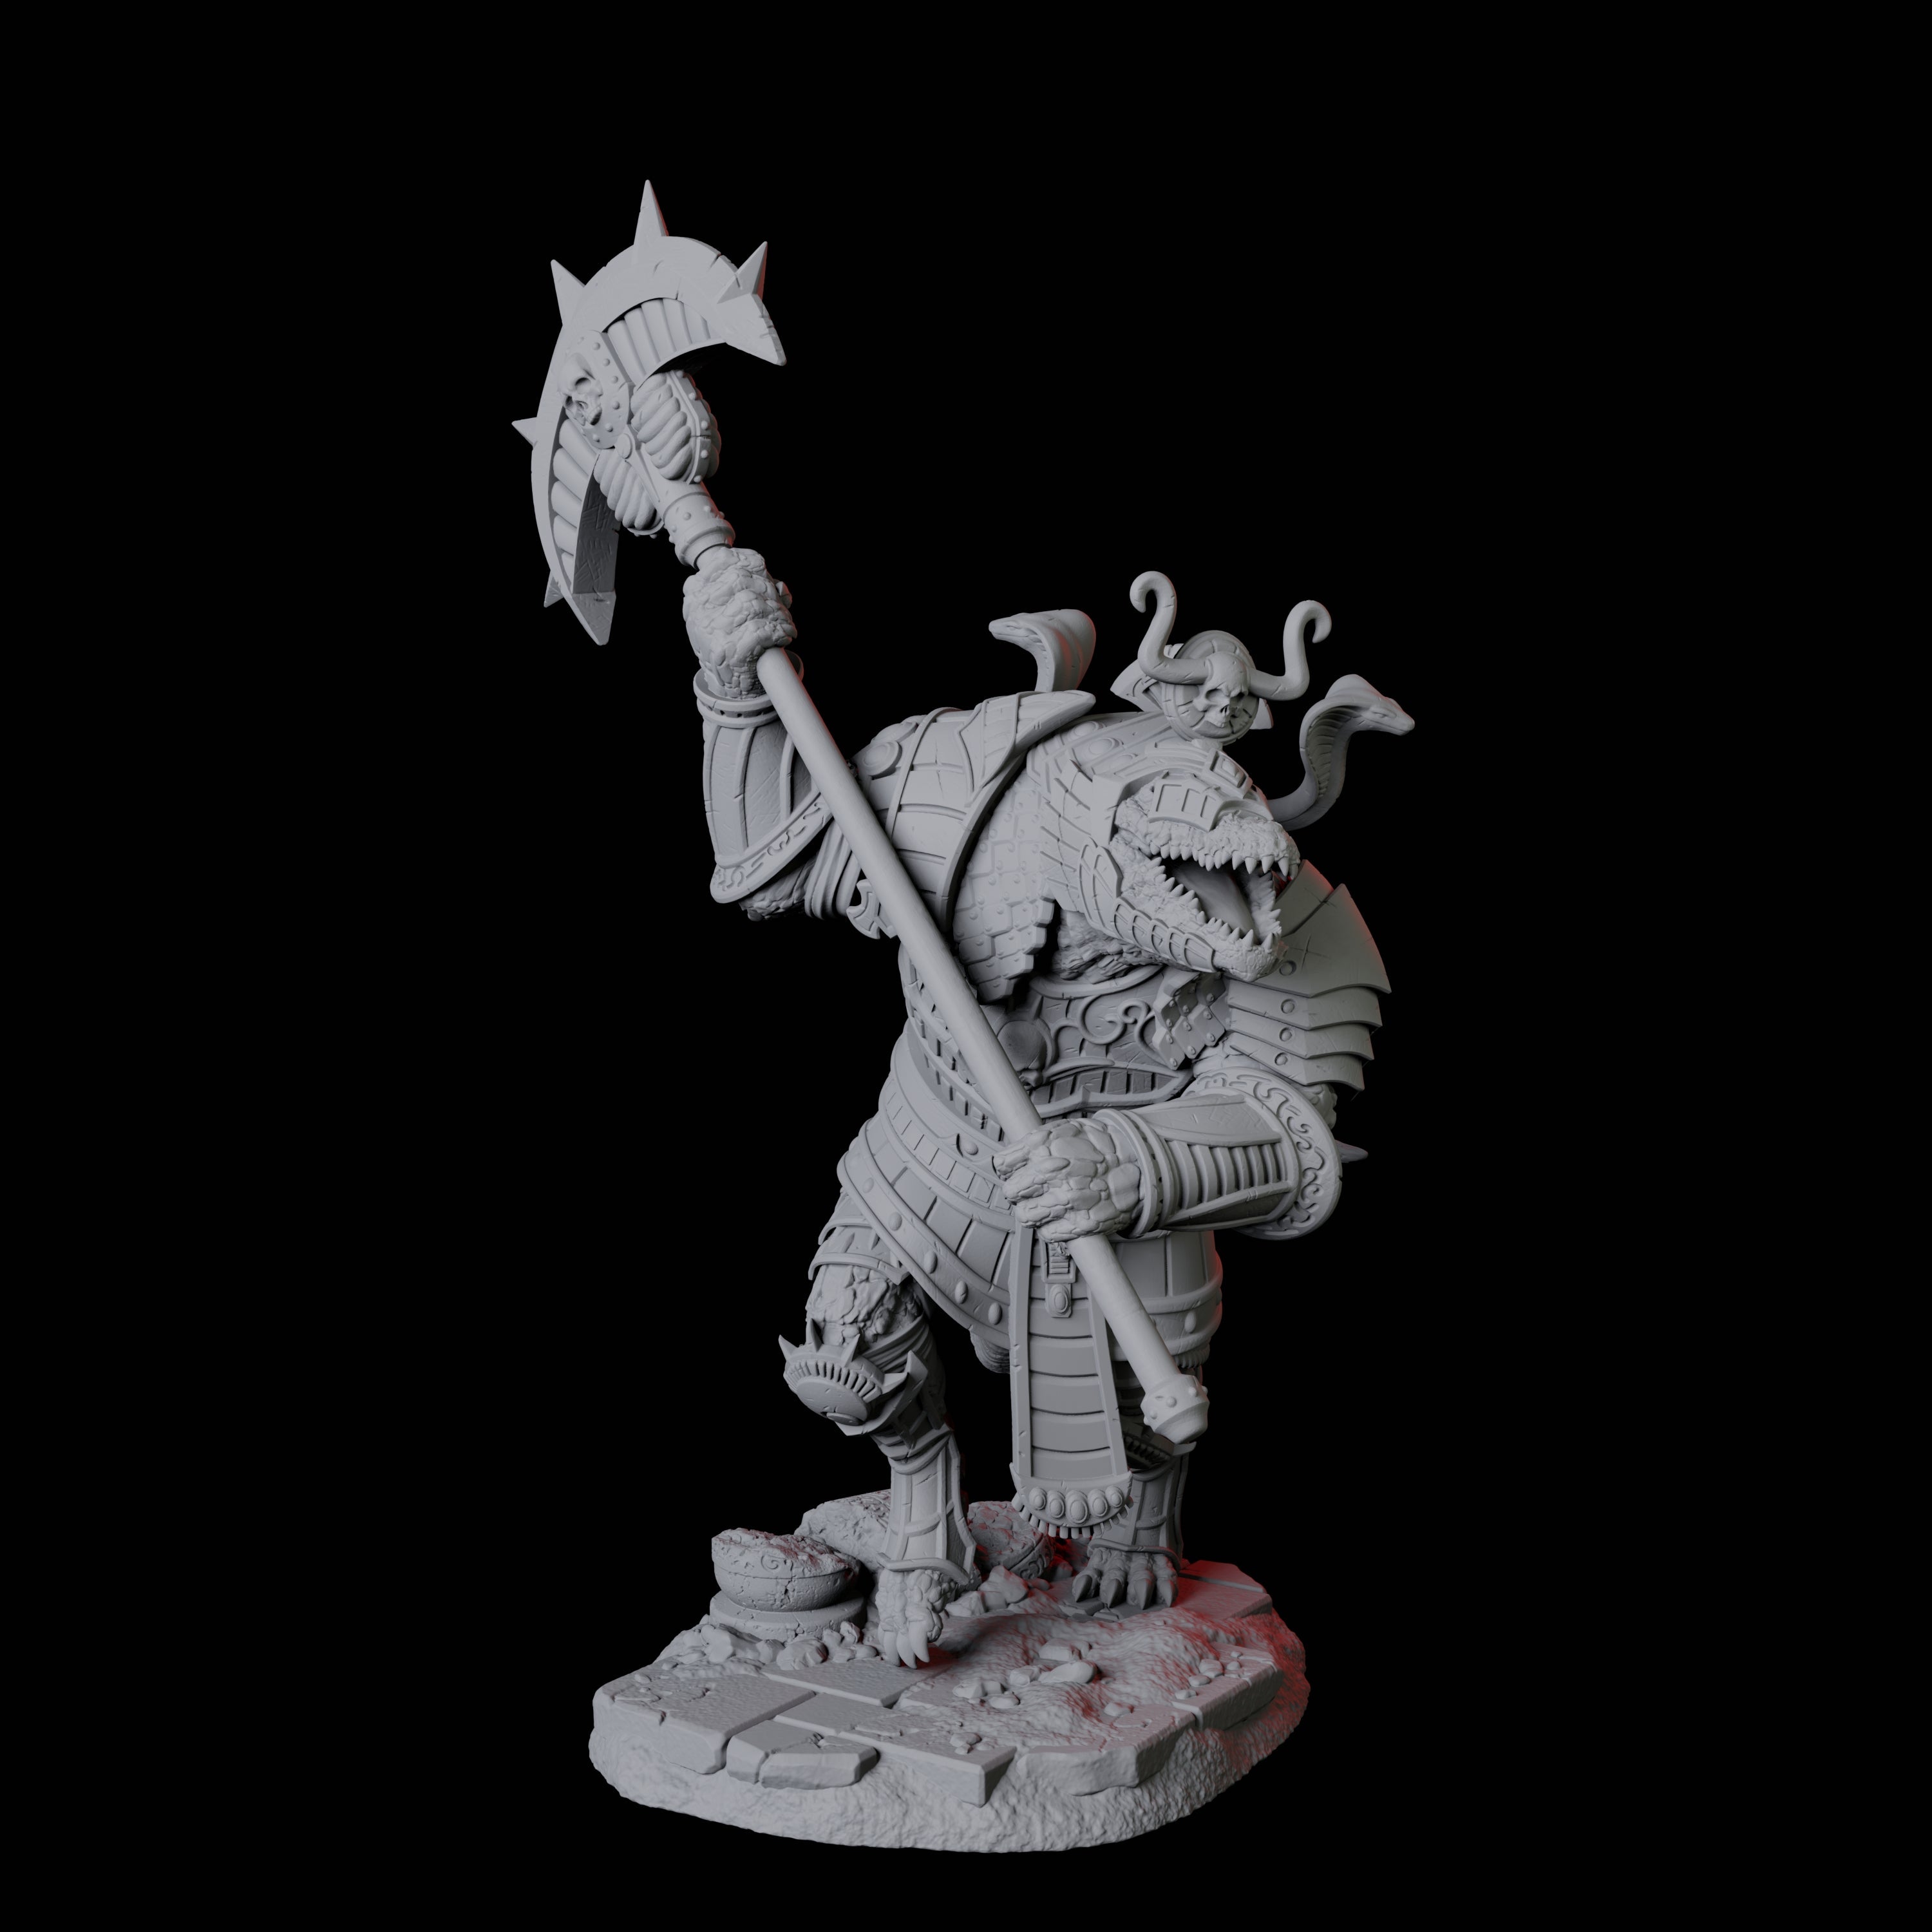 Four Charging Crocodile Lizardfolk Soldiers Miniature for Dungeons and Dragons, Pathfinder or other TTRPGs